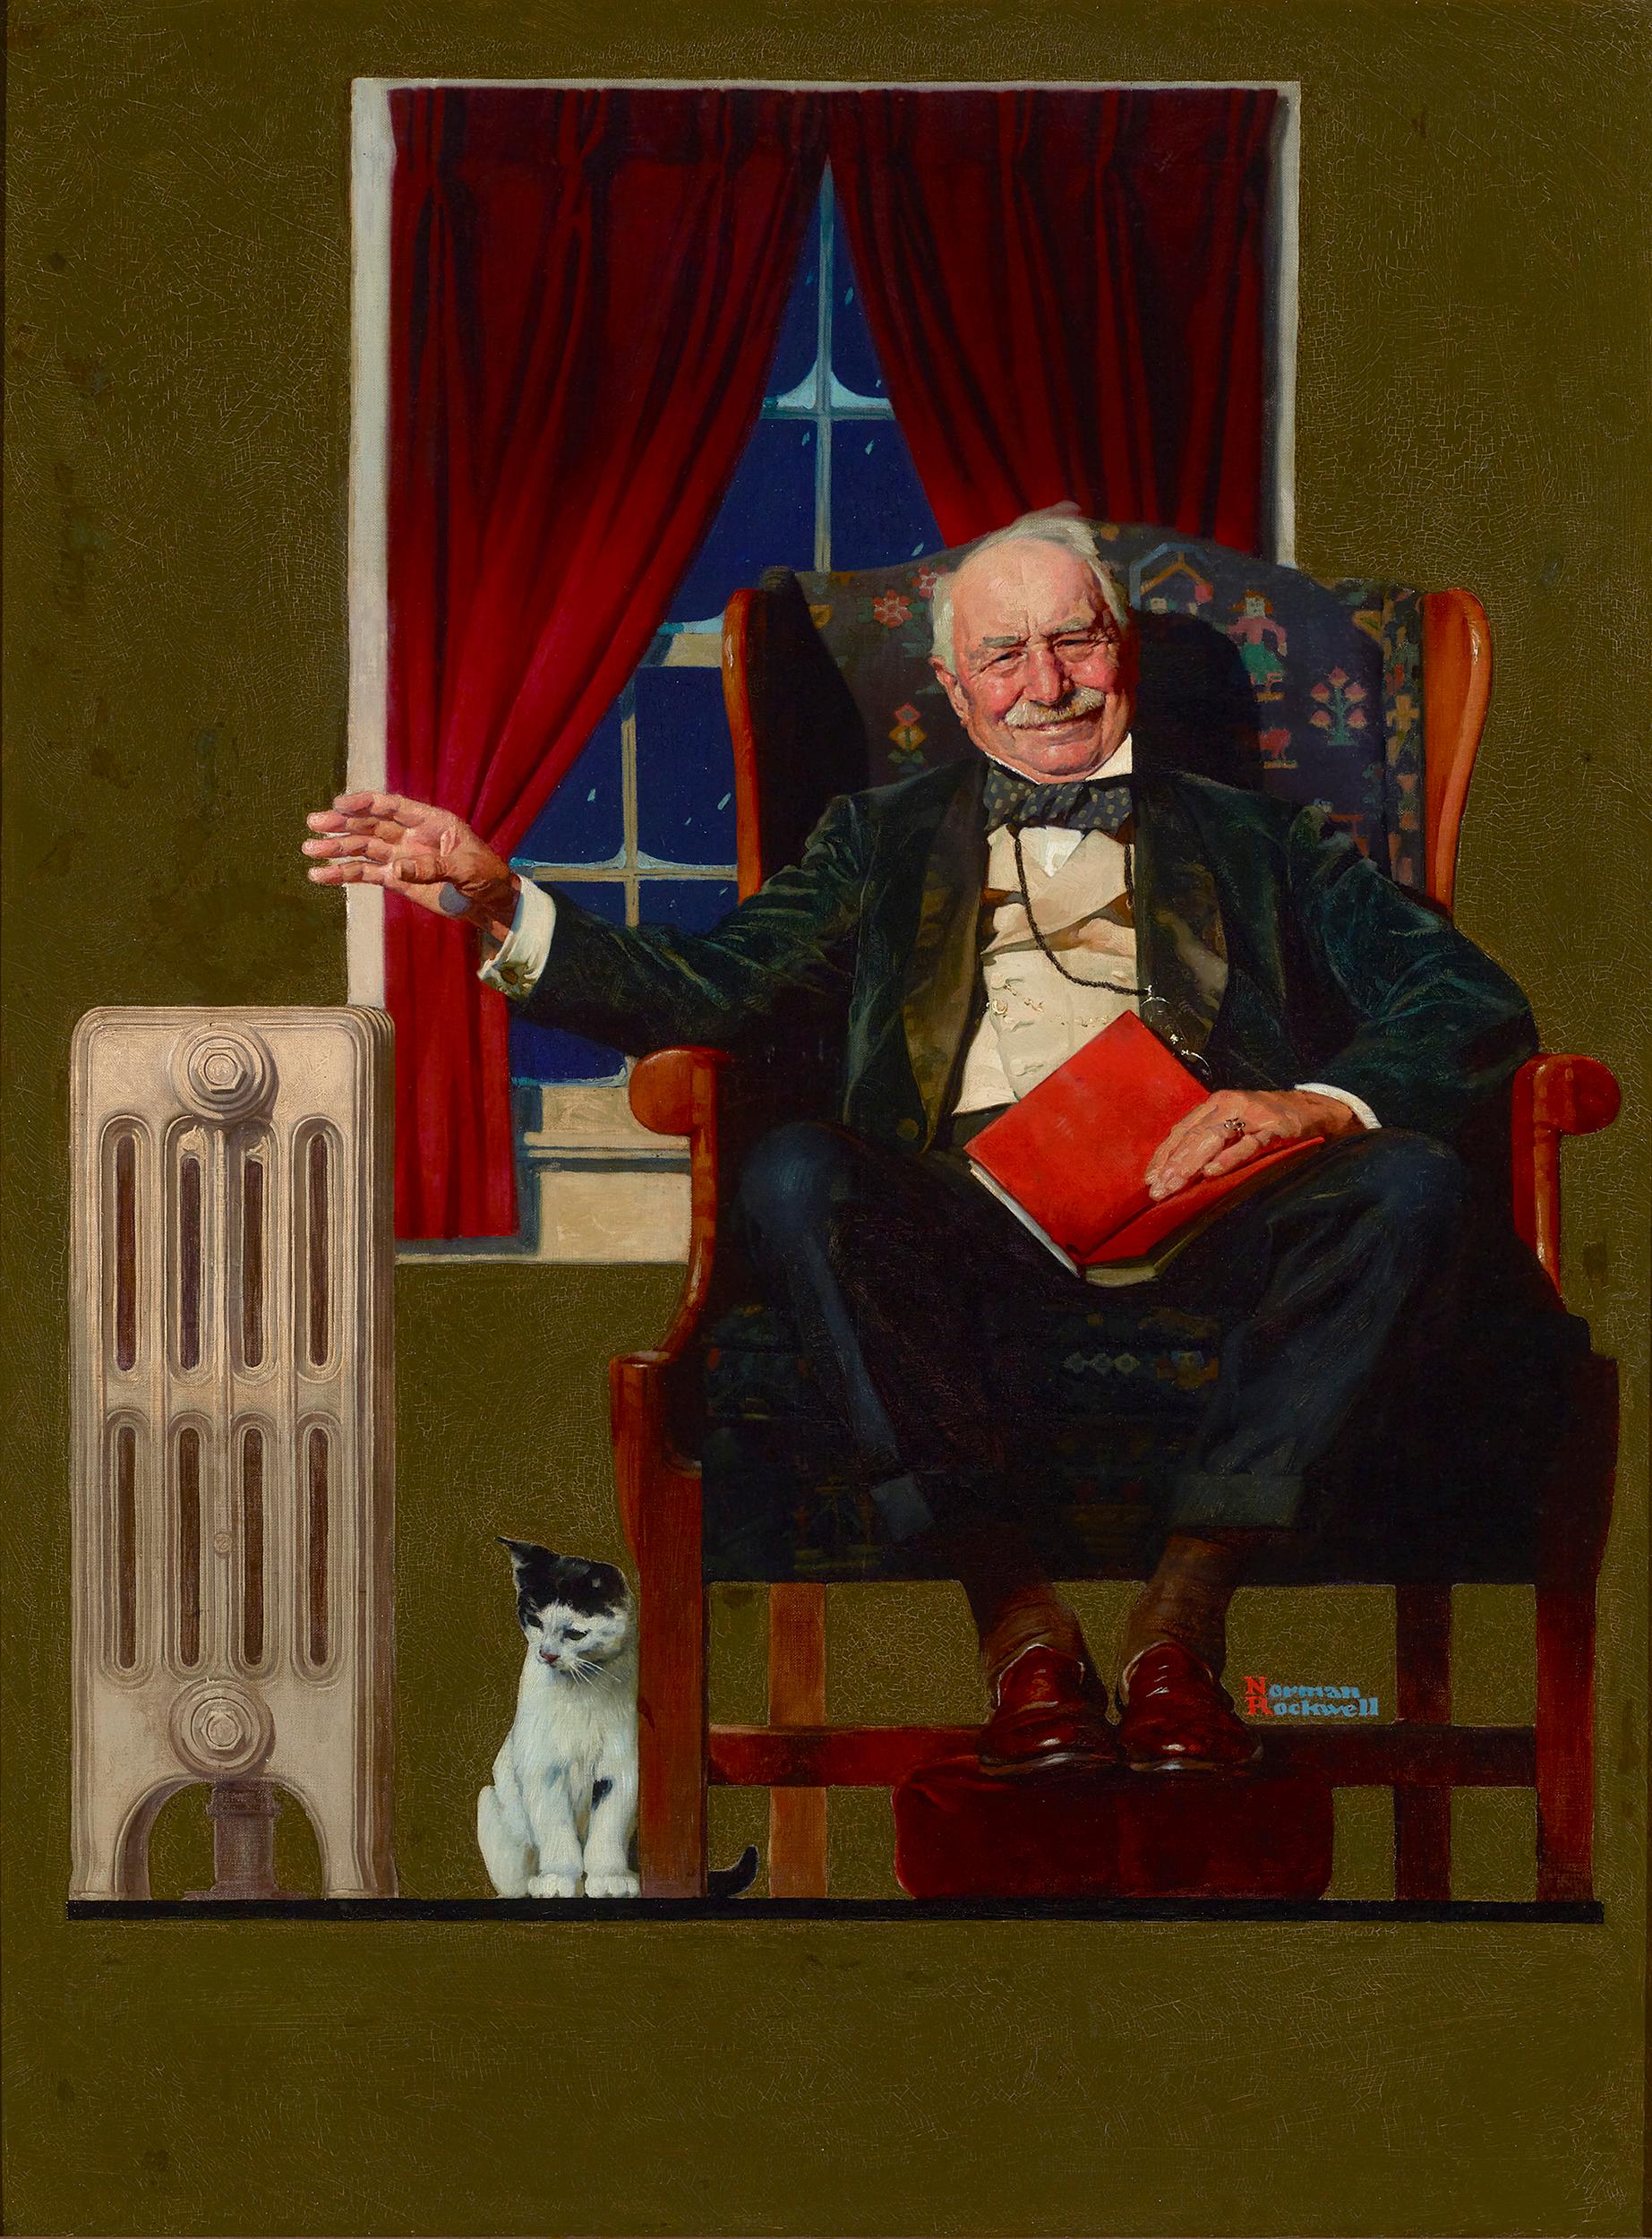 Man Seated by Radiator by Norman Rockwell